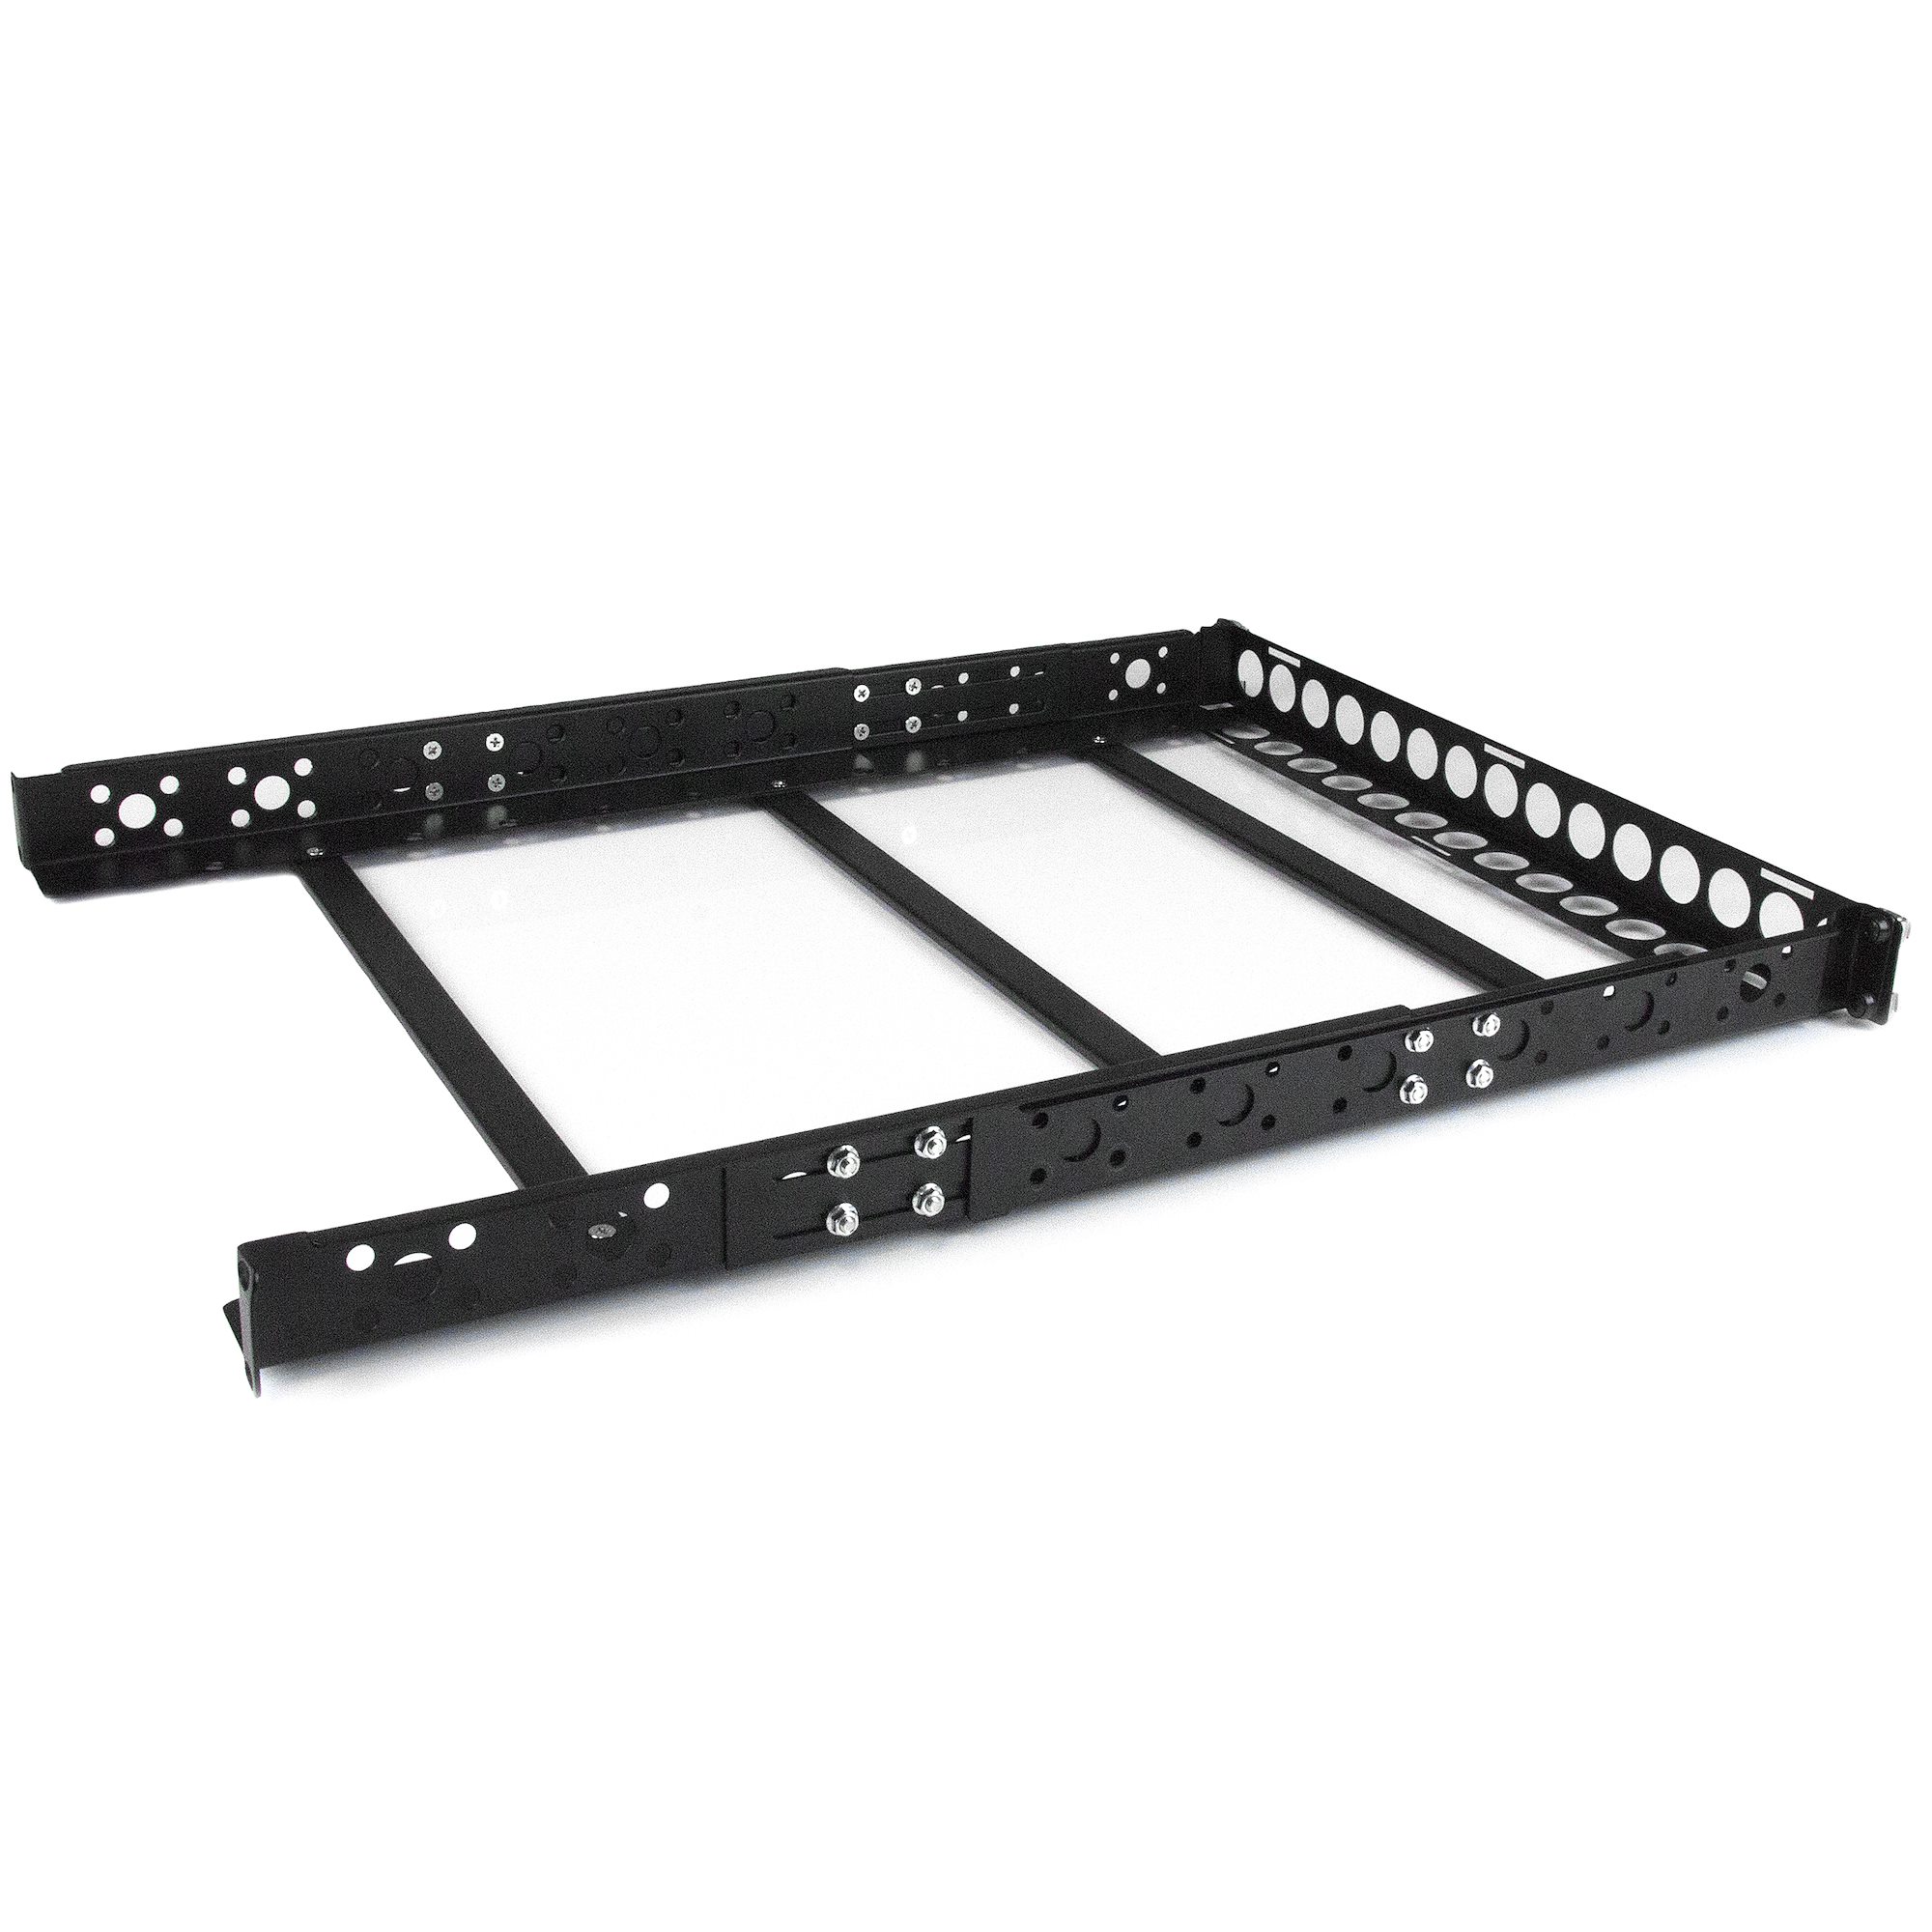 DIN RAIL Rack mount Products for Rack 19inch 